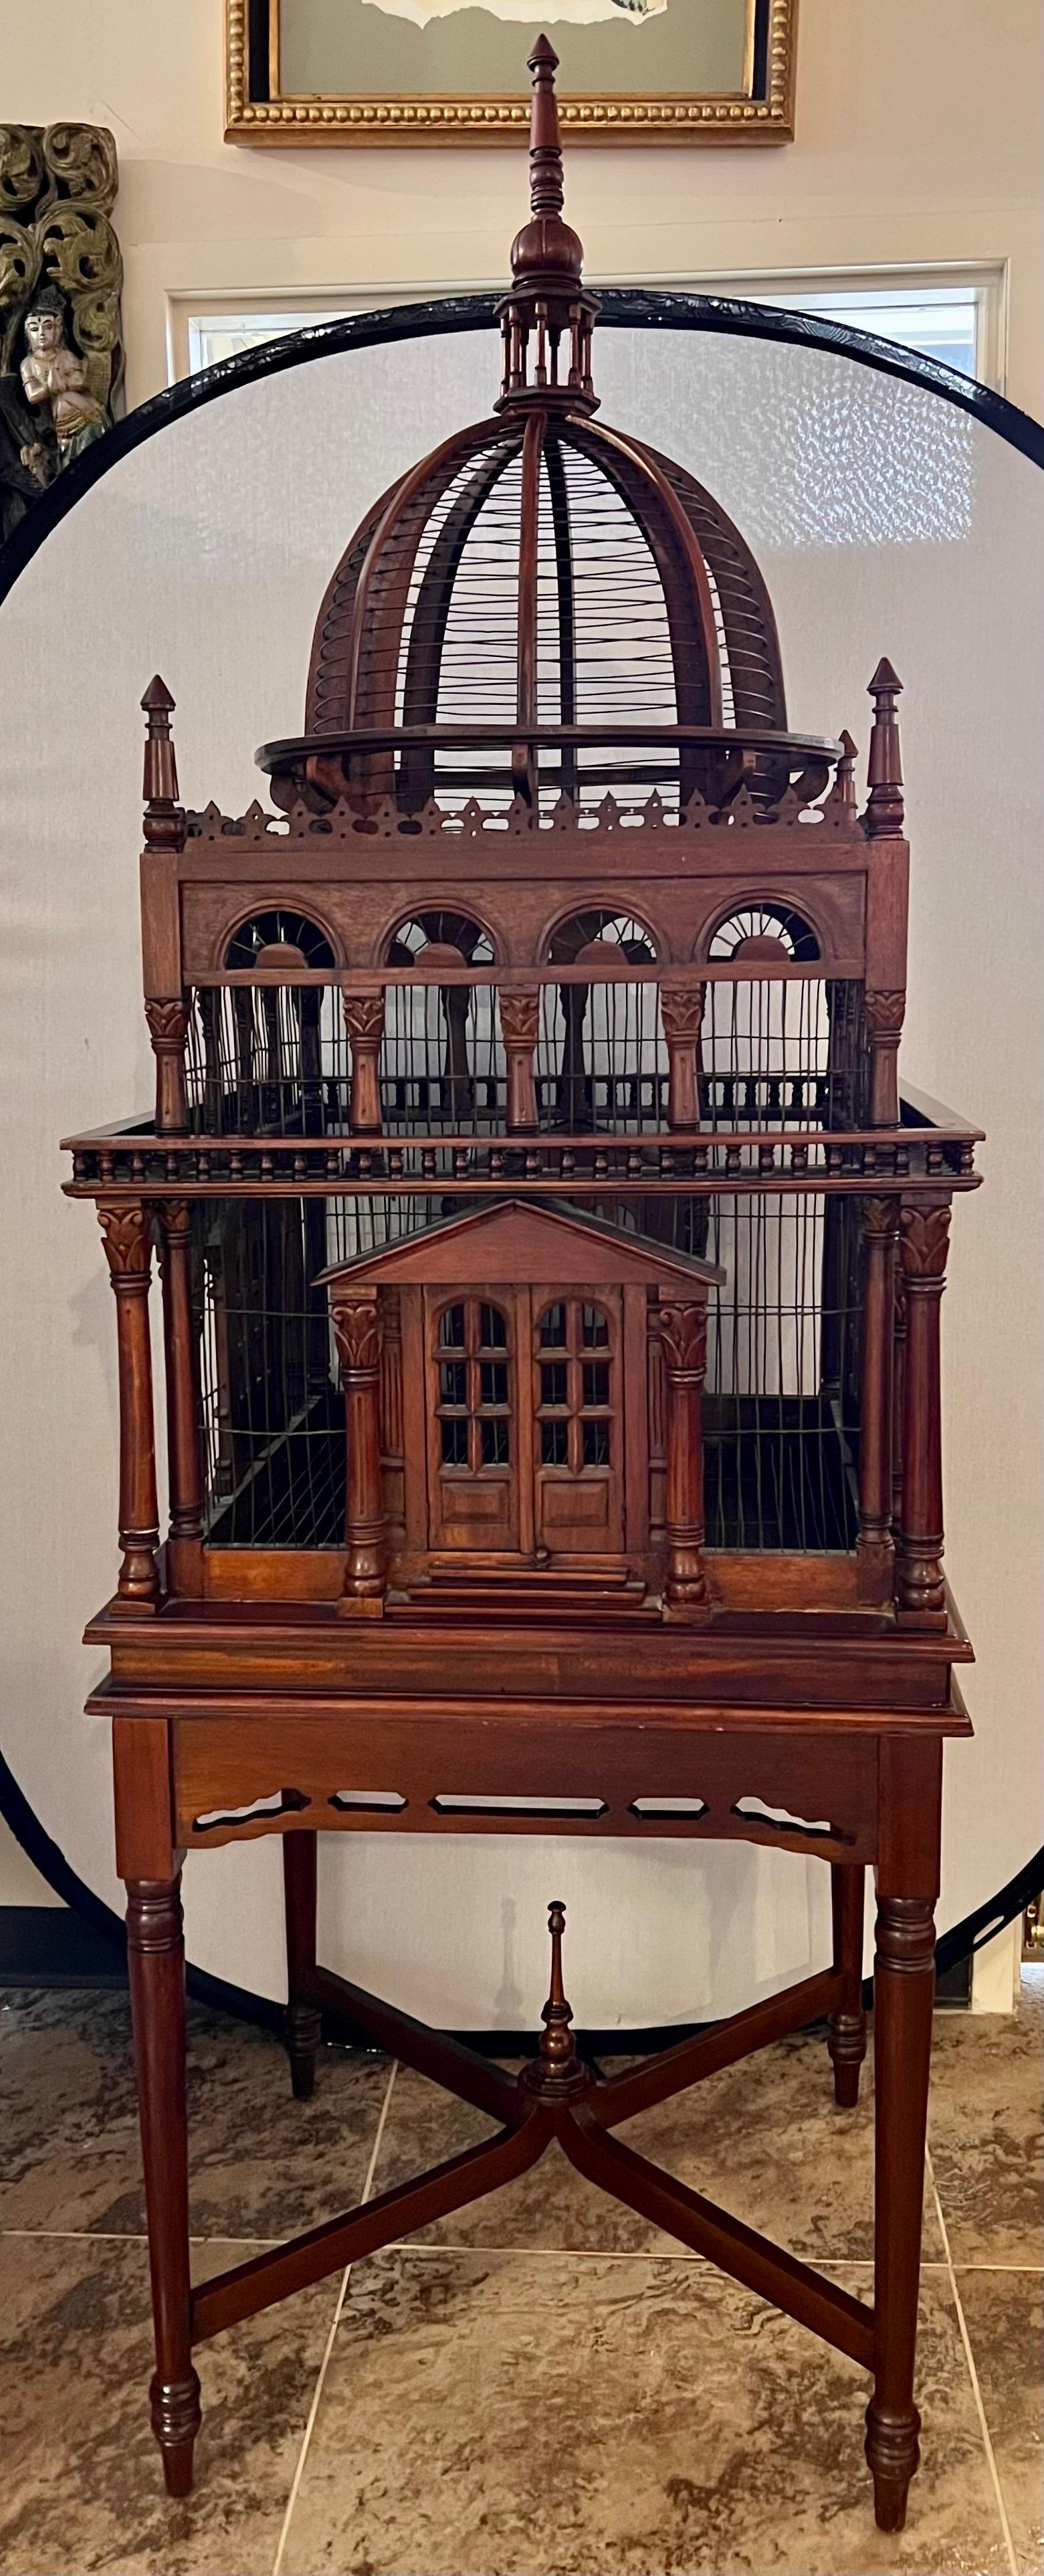 Stunning architectural birdcage made in the Victorian style. 
This exquisite piece is painstakingly hand crafted from smooth dark brown mahogany. A large eye catching central dome sits atop the piece.
The detail is quite amazing! 
Comes with